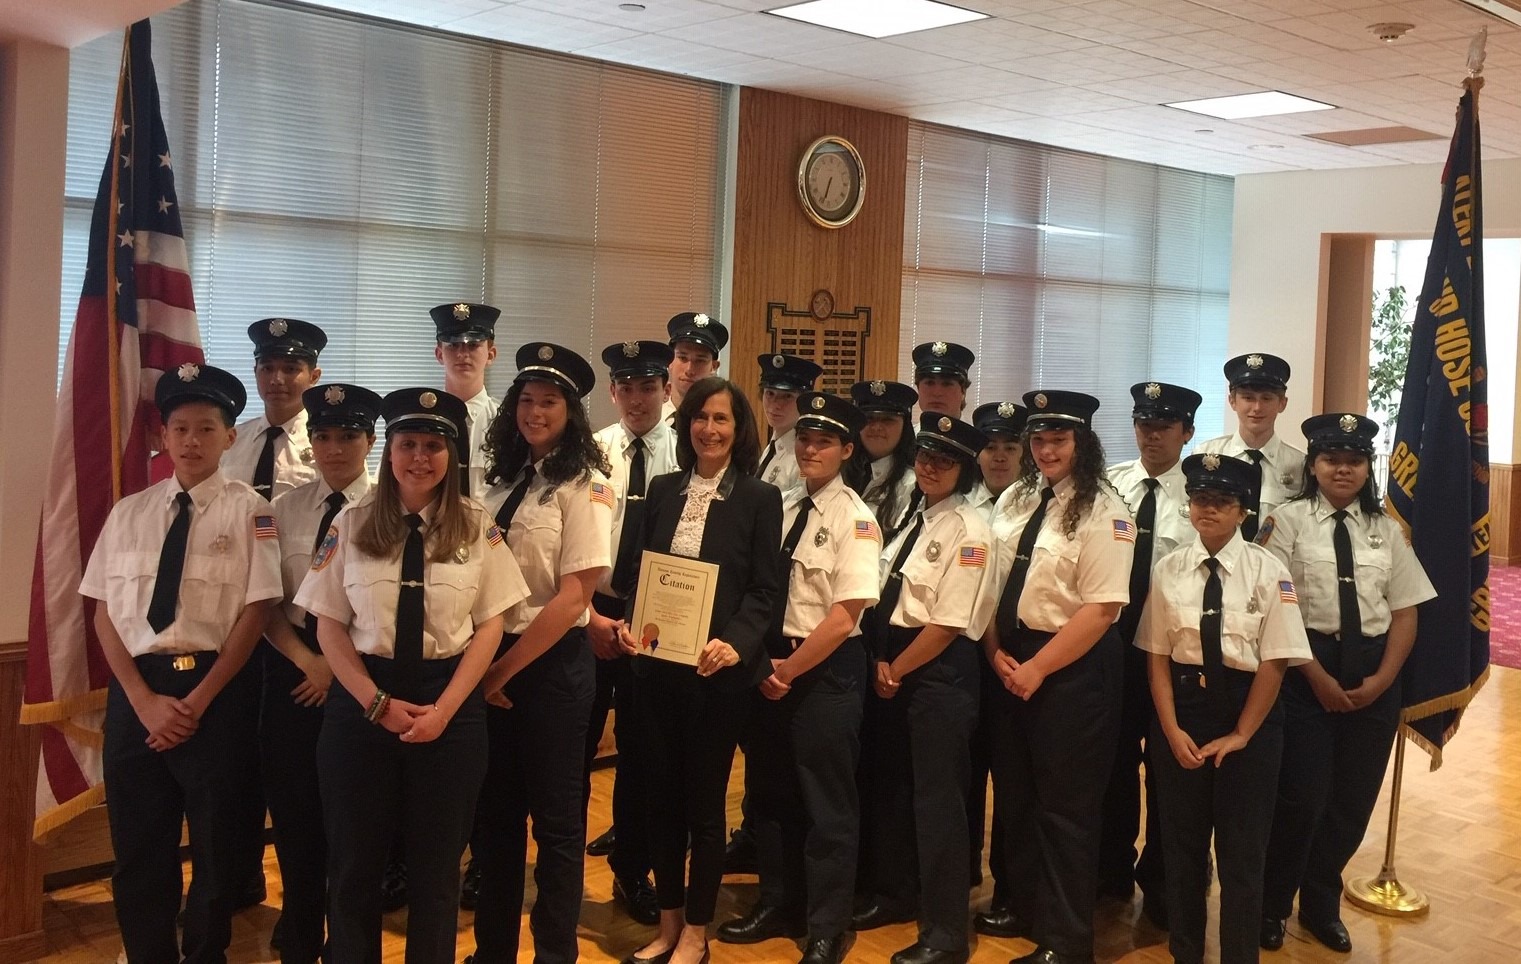 Nassau County Legislator Ellen Birnbaum congratulated the Great Neck Alert Junior Firefighters for being recognized as the top program of its kind in the state. (Photo courtesy of Nassau County Legislator Ellen Birnbaum's office)